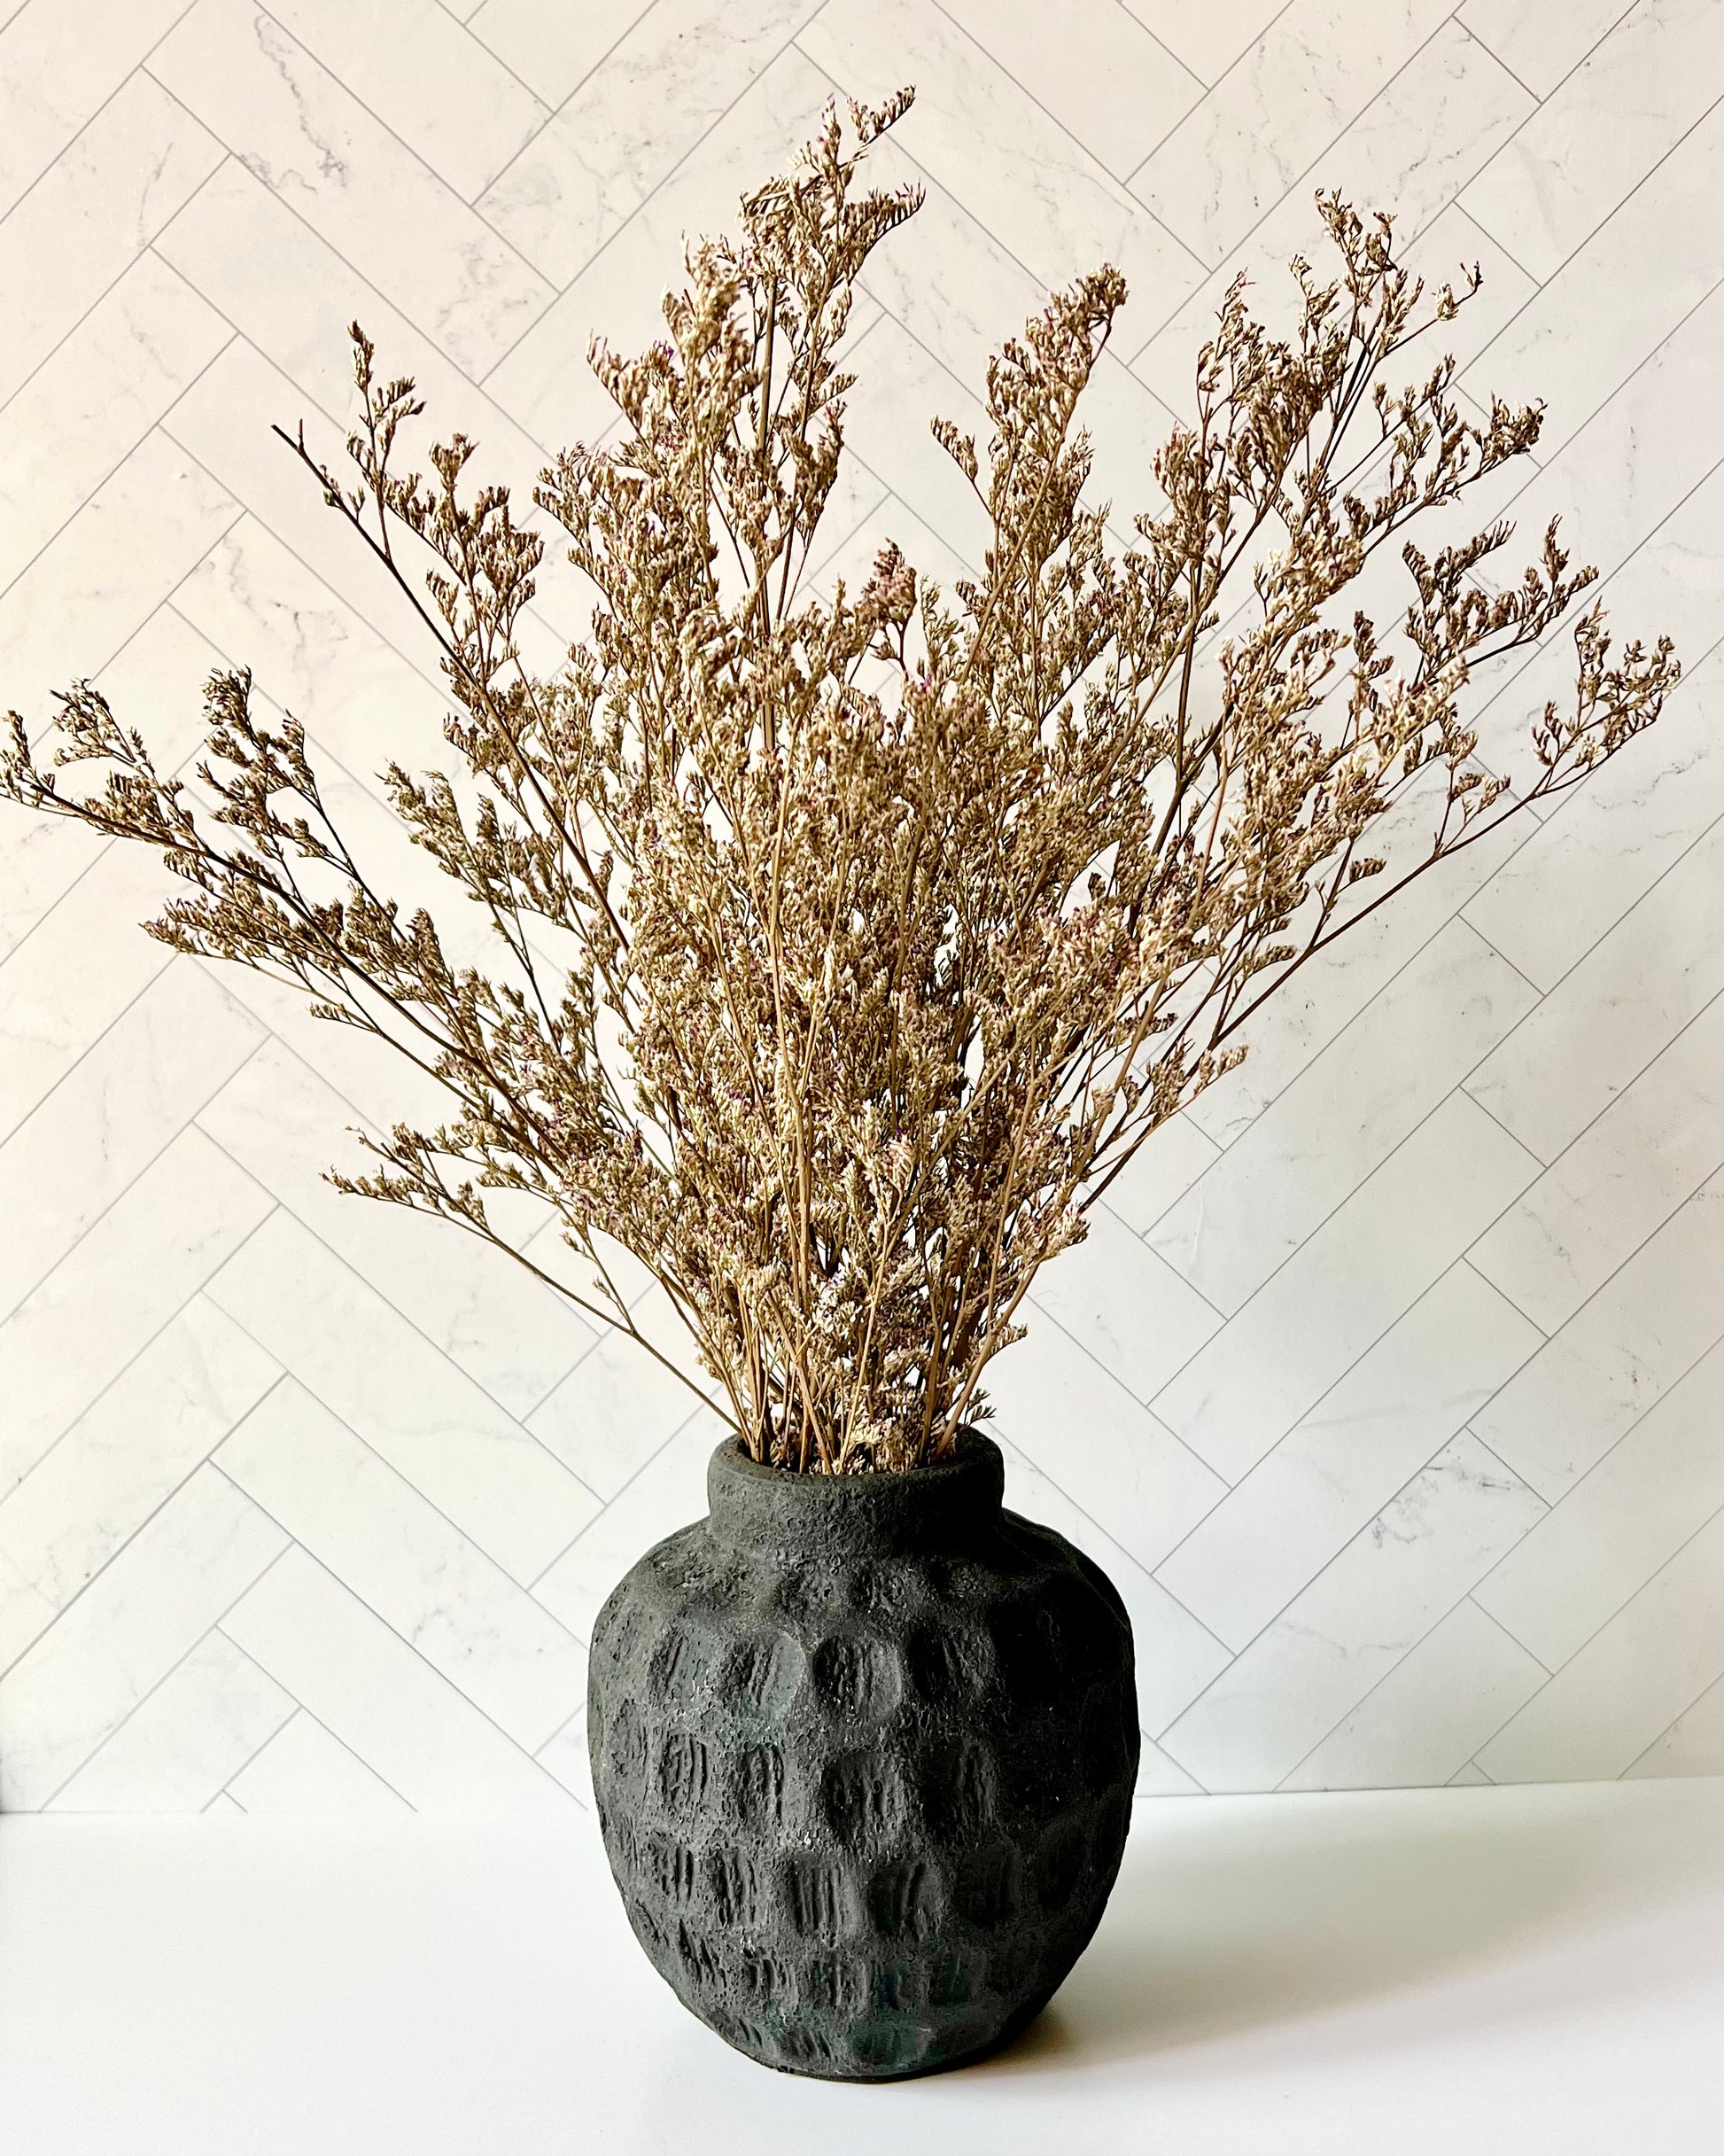 The Limonium Dried Flowers in a small black vase against a light background